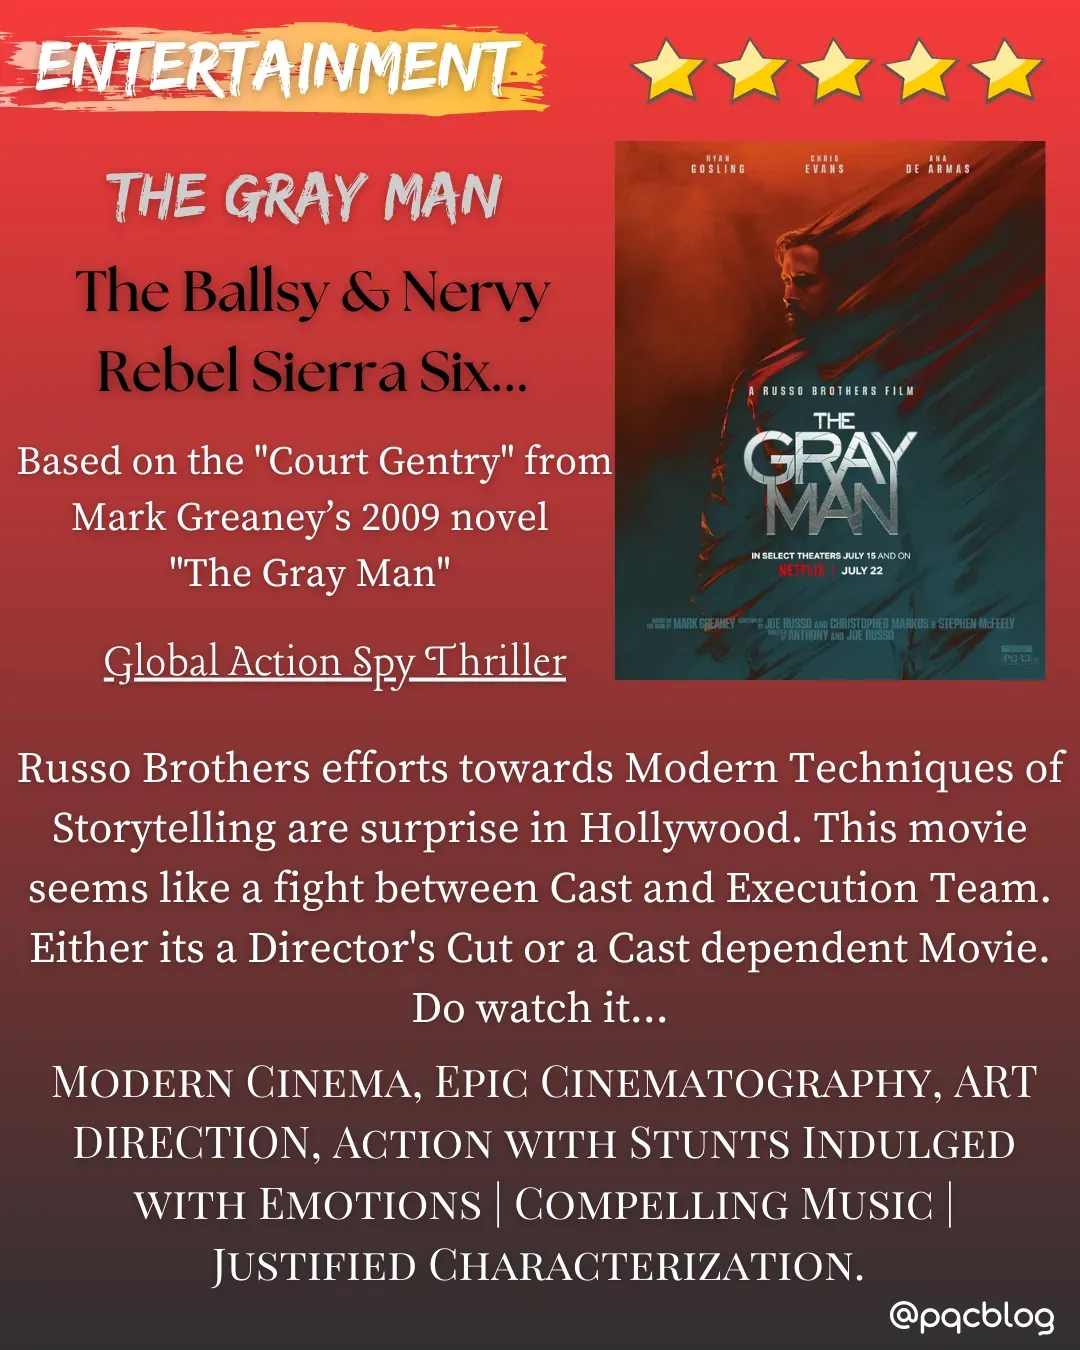 THE GRAY MAN Review by PQCBlog